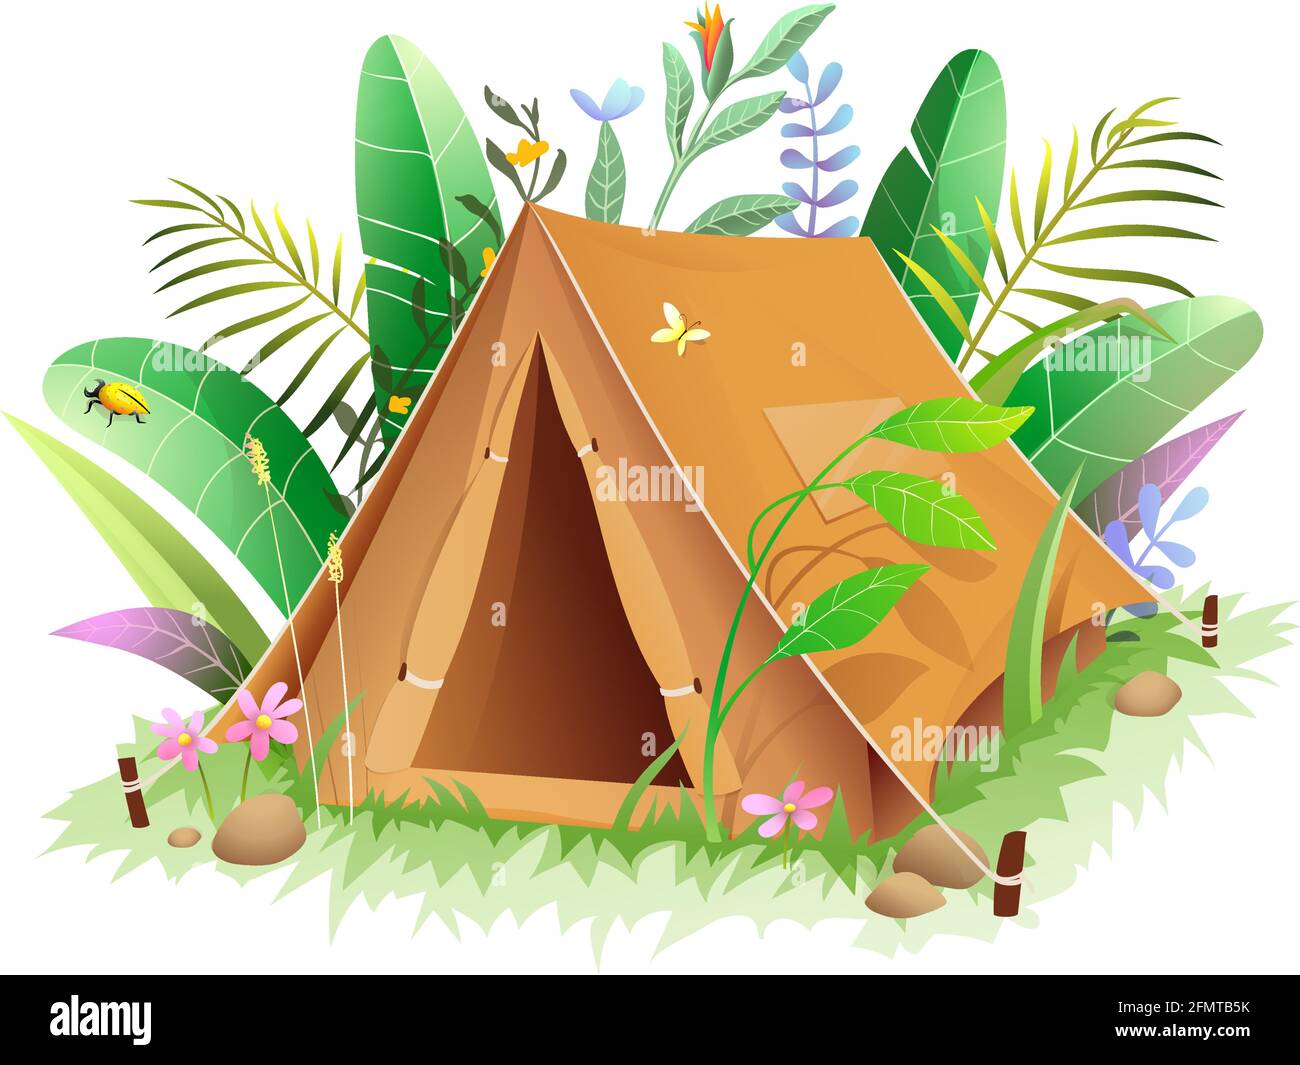 Tent Icon in Jungle or Forest in Green Leaves Stock Vector